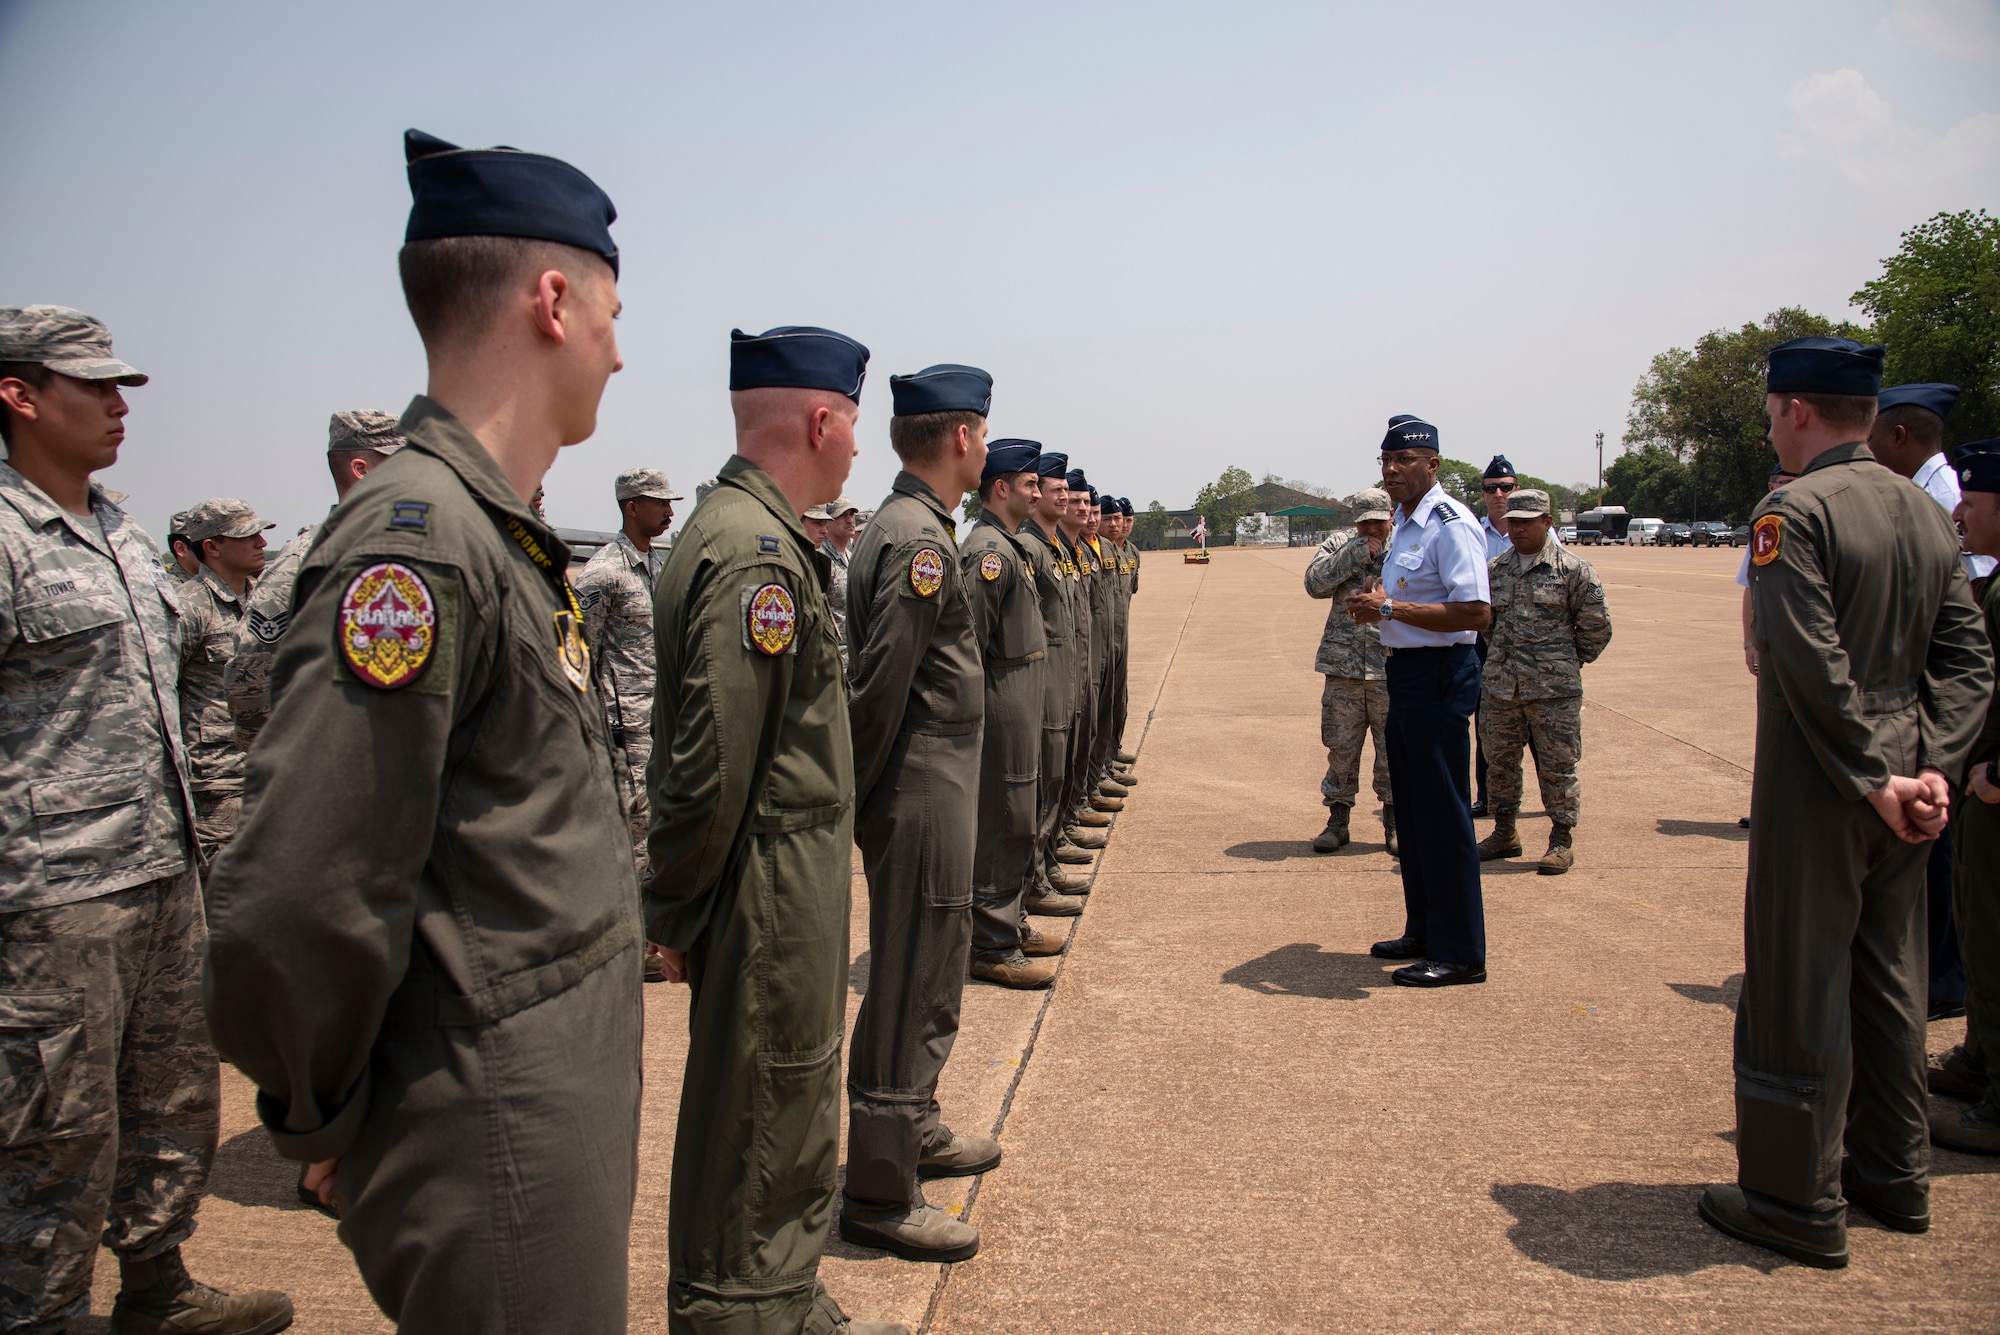 U.S. Air Force Gen. CQ Brown Jr., Pacific Air Forces commander, thanks Airmen from the 35th Fighter Wing following the COPE Tiger 2019 closing ceremony at Korat Royal Thai Air Force Base, Thailand, March 22, 2019.